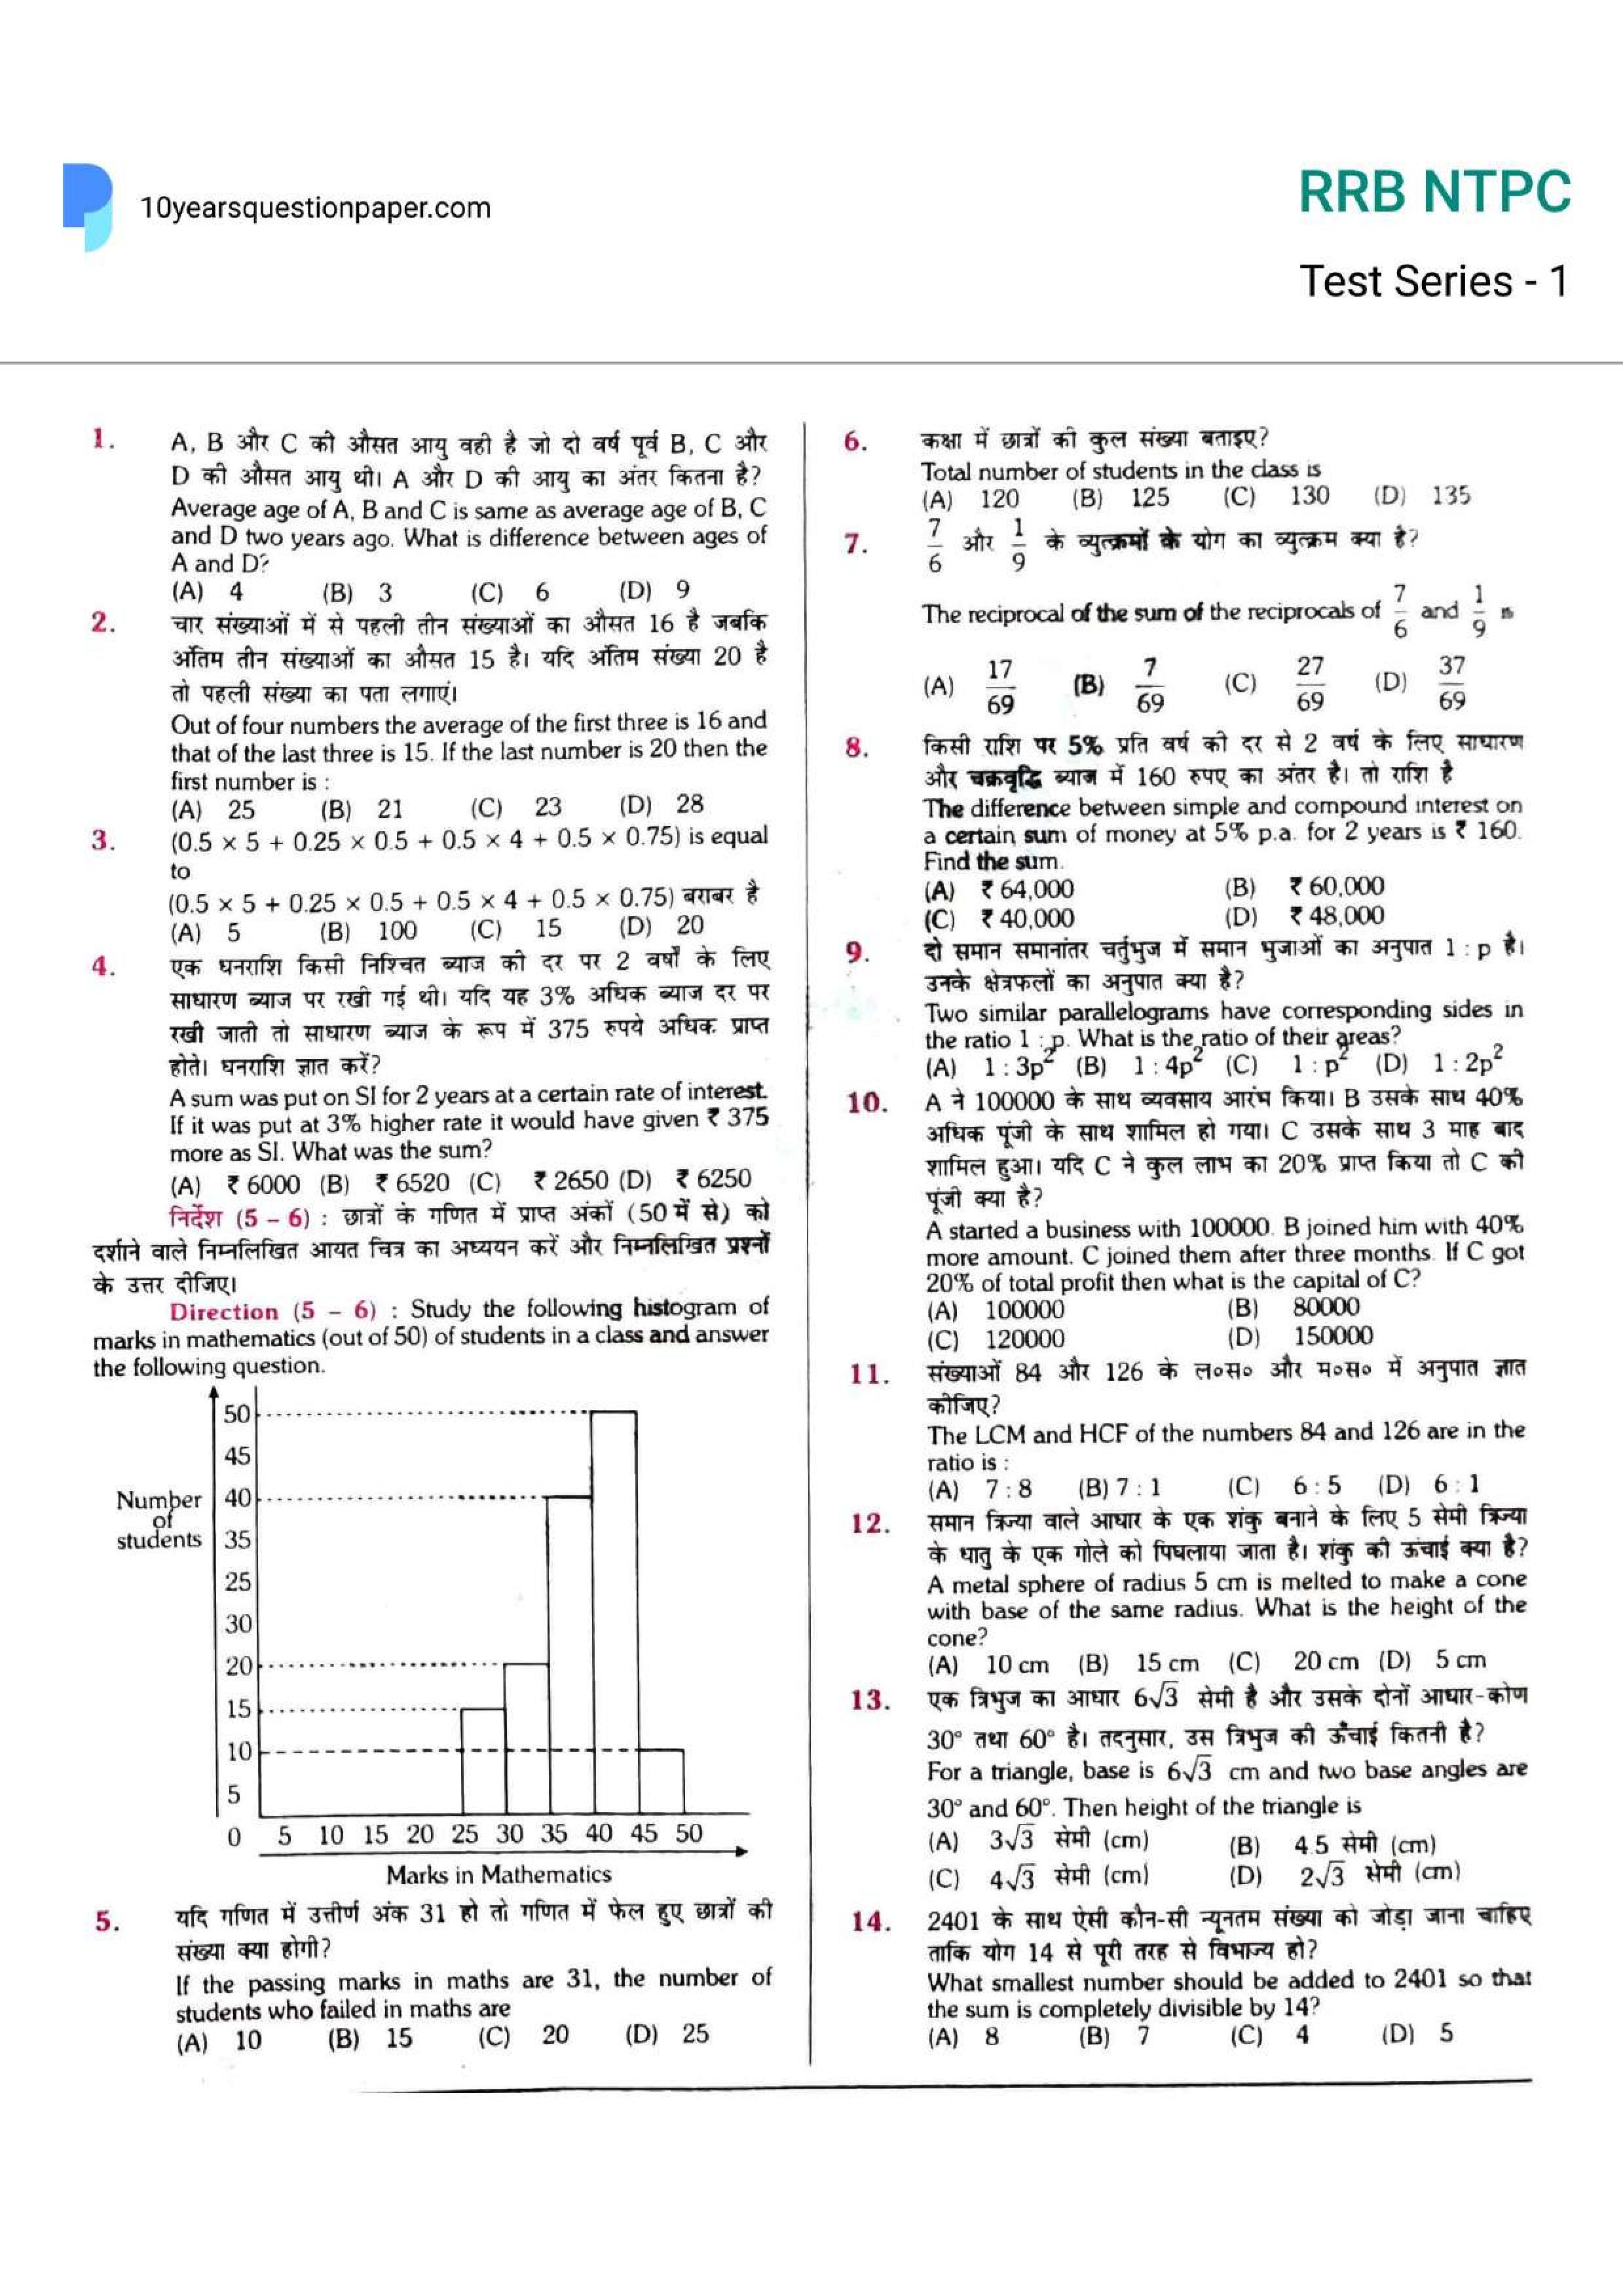 RRB NTPC Question Paper 2021 page 1